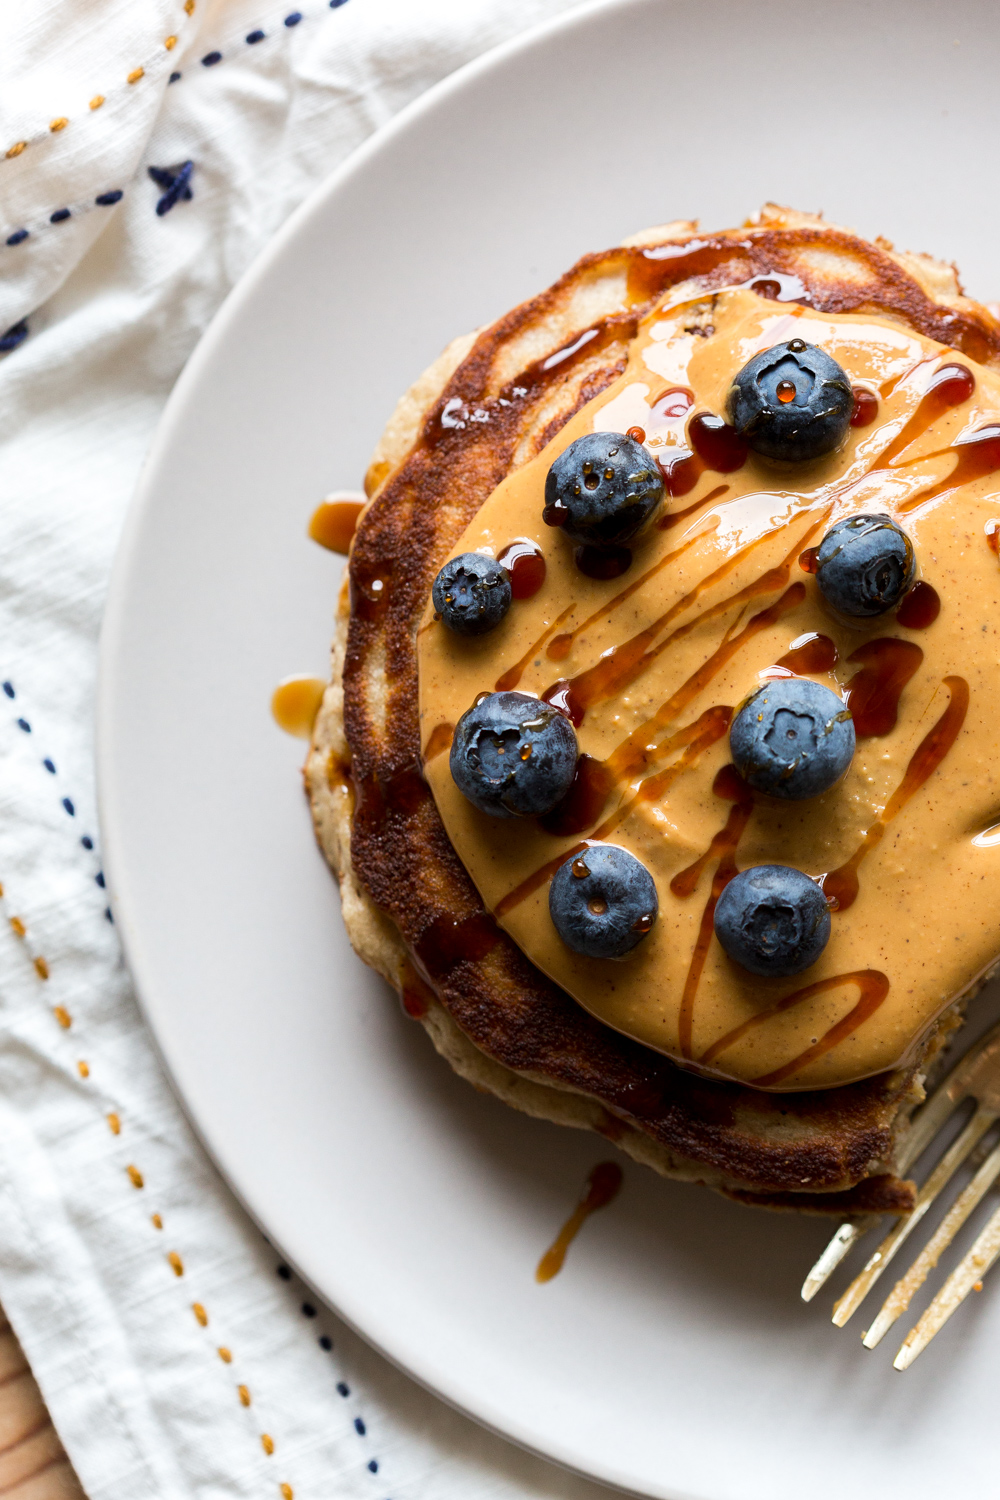 Gluten Free Almond Flour Banana Pancakes with almond butter, blueberries and syrup